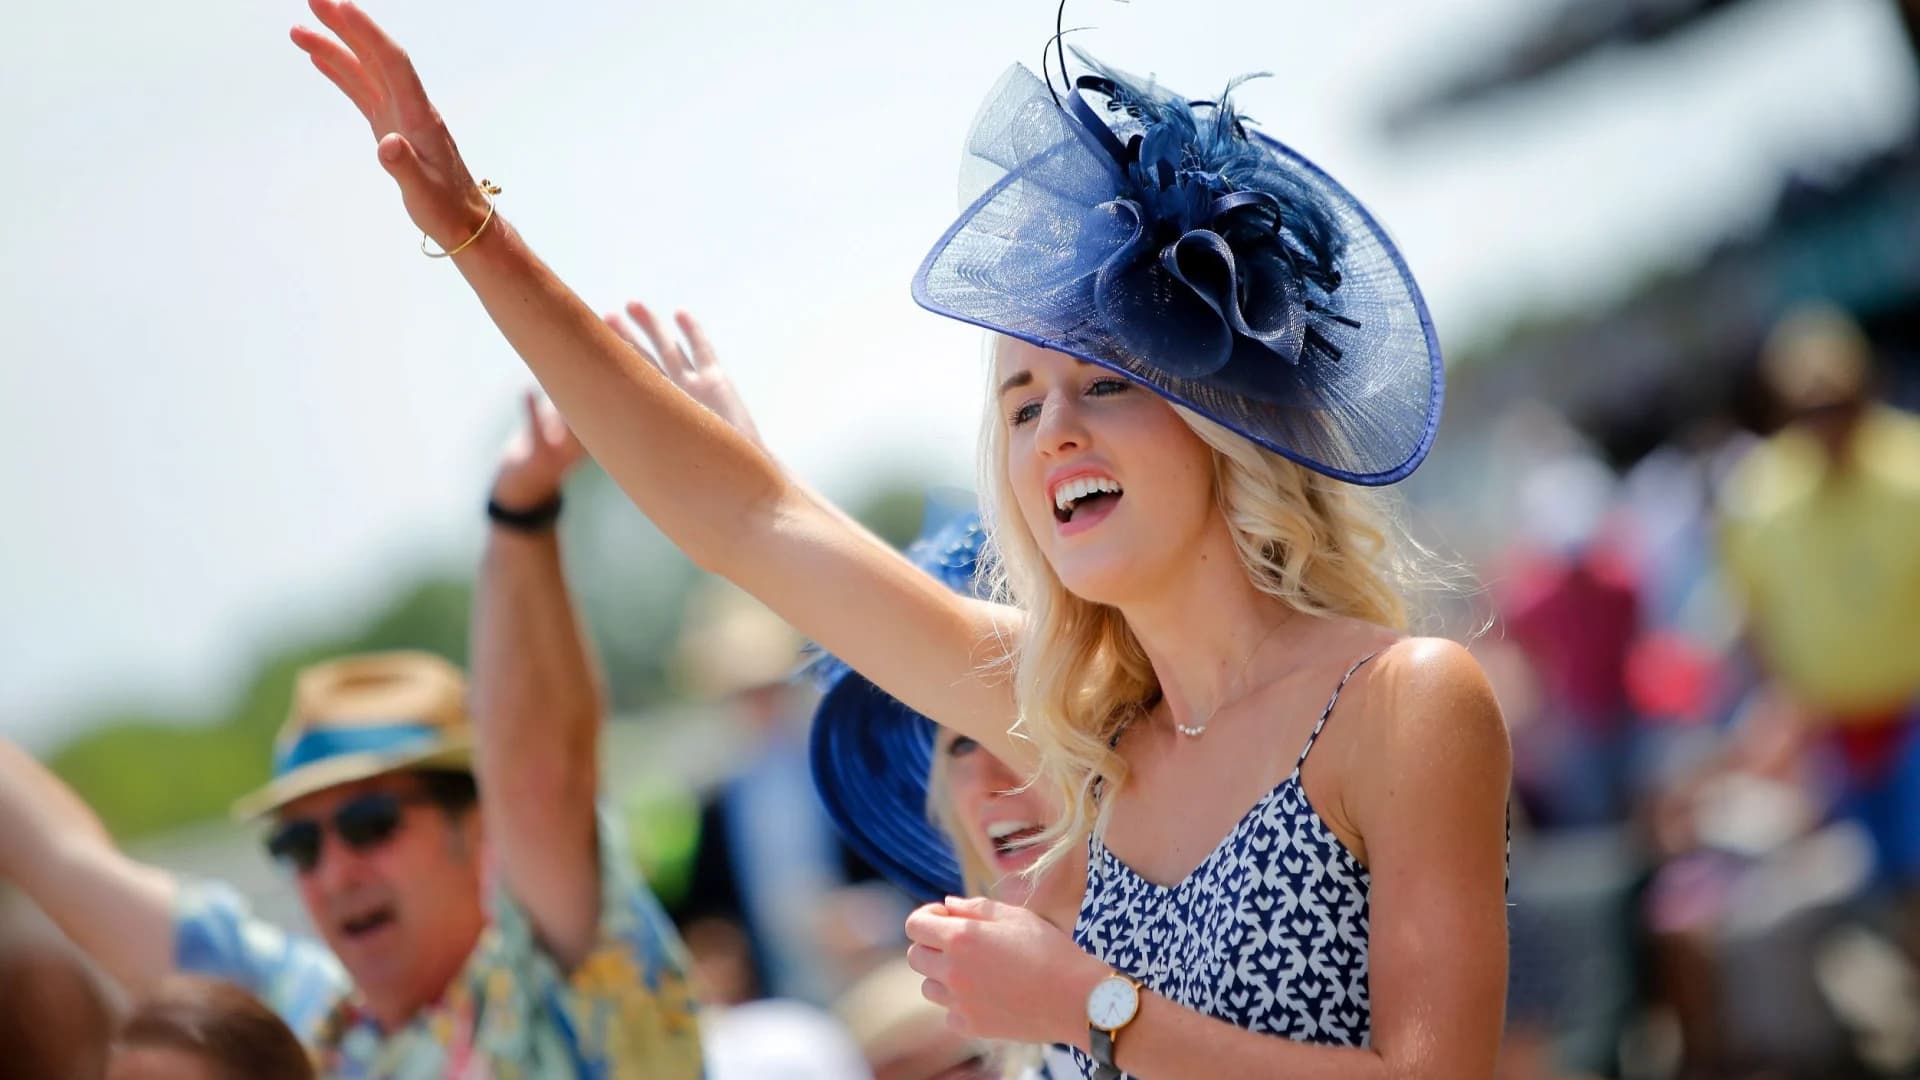 Sights and scenes at the 2019 Belmont Stakes